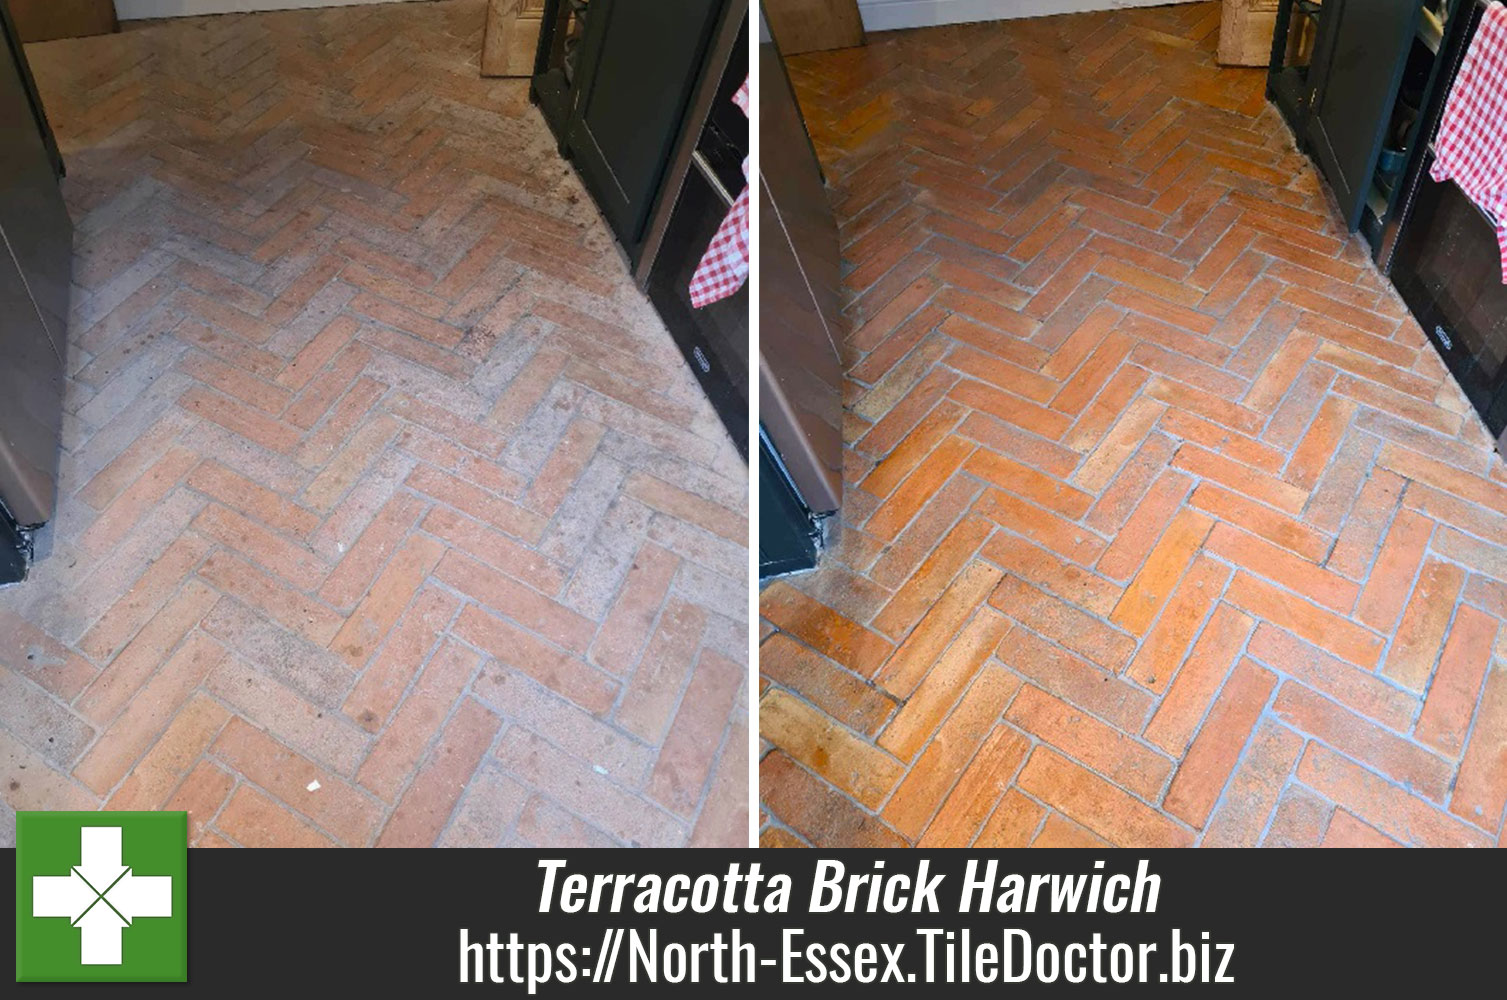 Deep Cleaning Brick Terracotta Tiles with Tile Doctor Pro-Clean in Harwich Essex